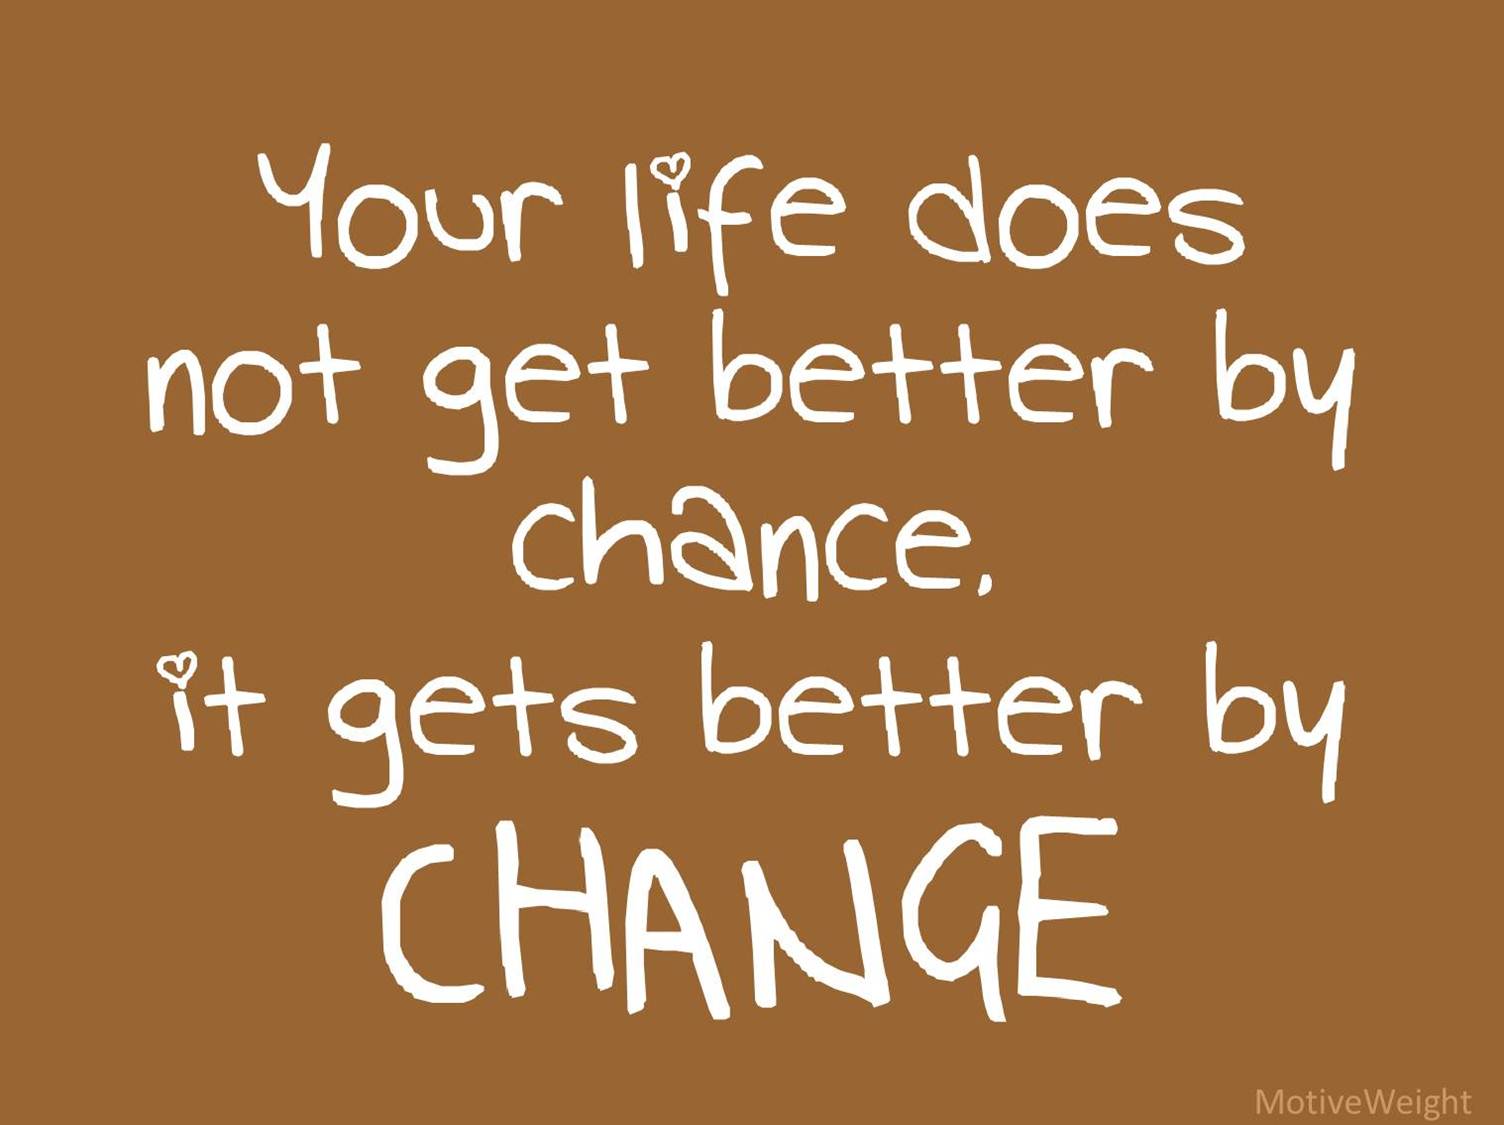 Quotes About Life Changes For The Better. QuotesGram